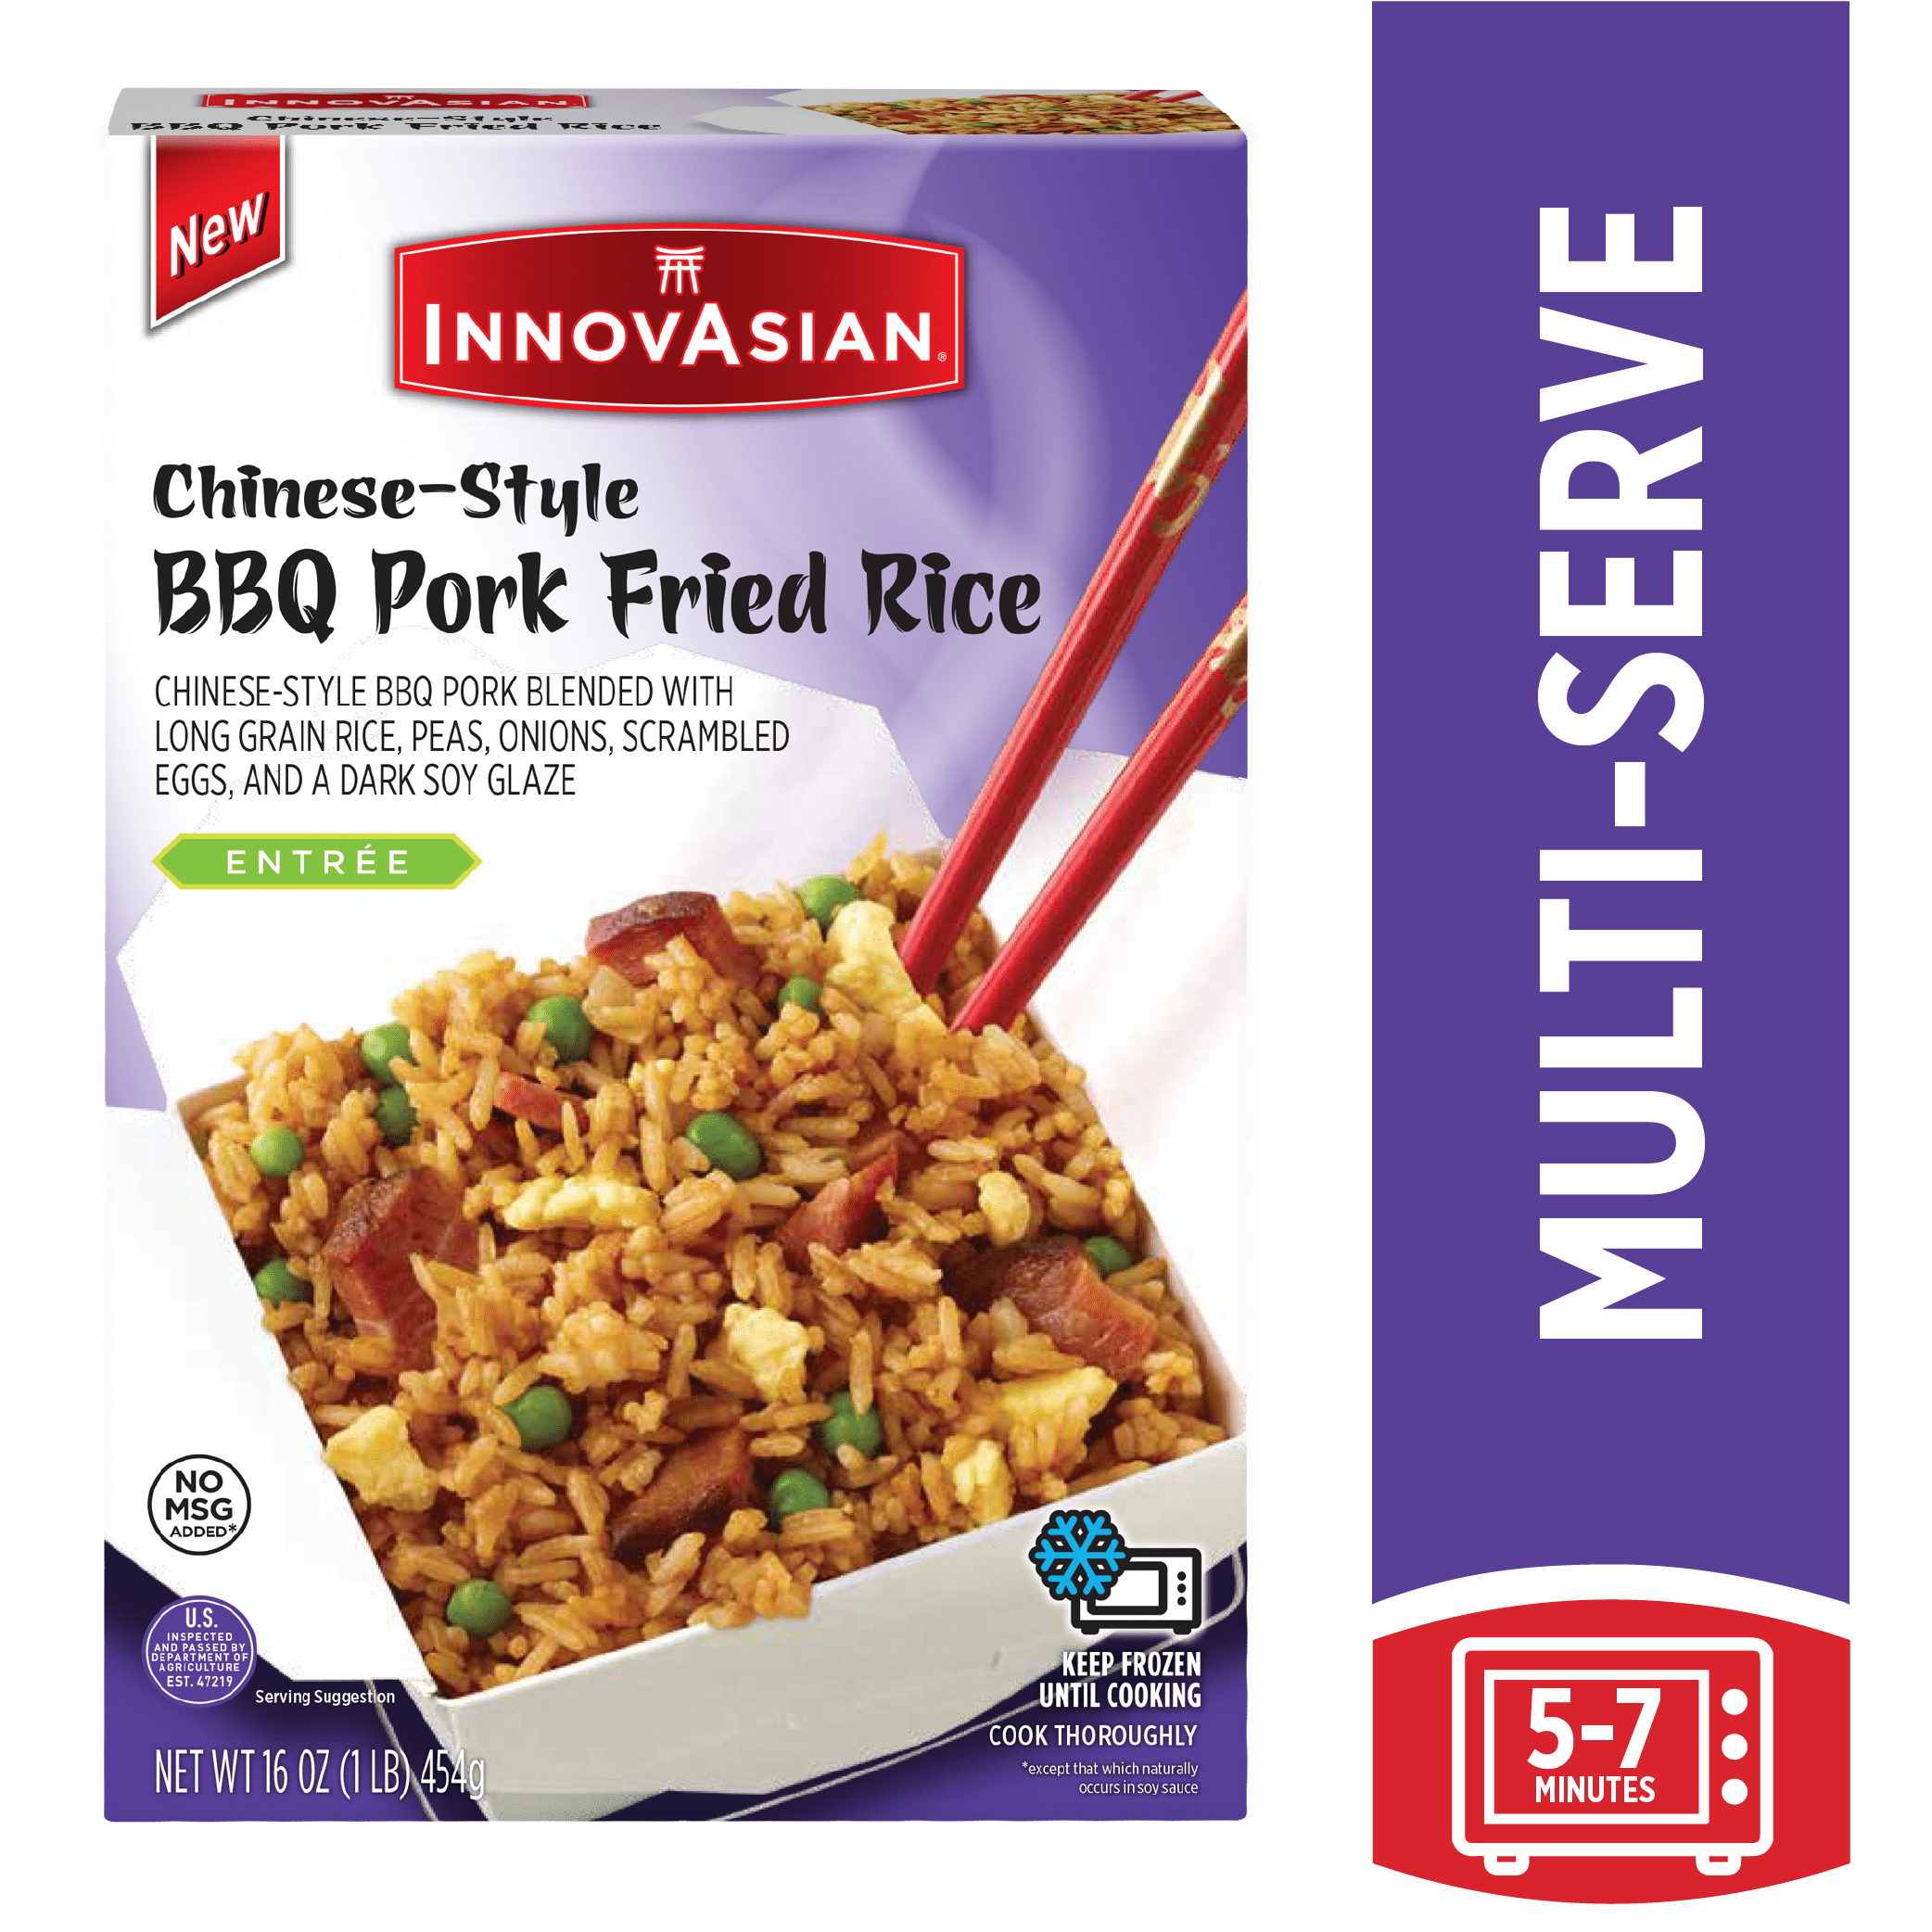 InnovAsian Chinese-Style BBQ Pork Fried Rice Meal, 16 oz (Frozen Meal)